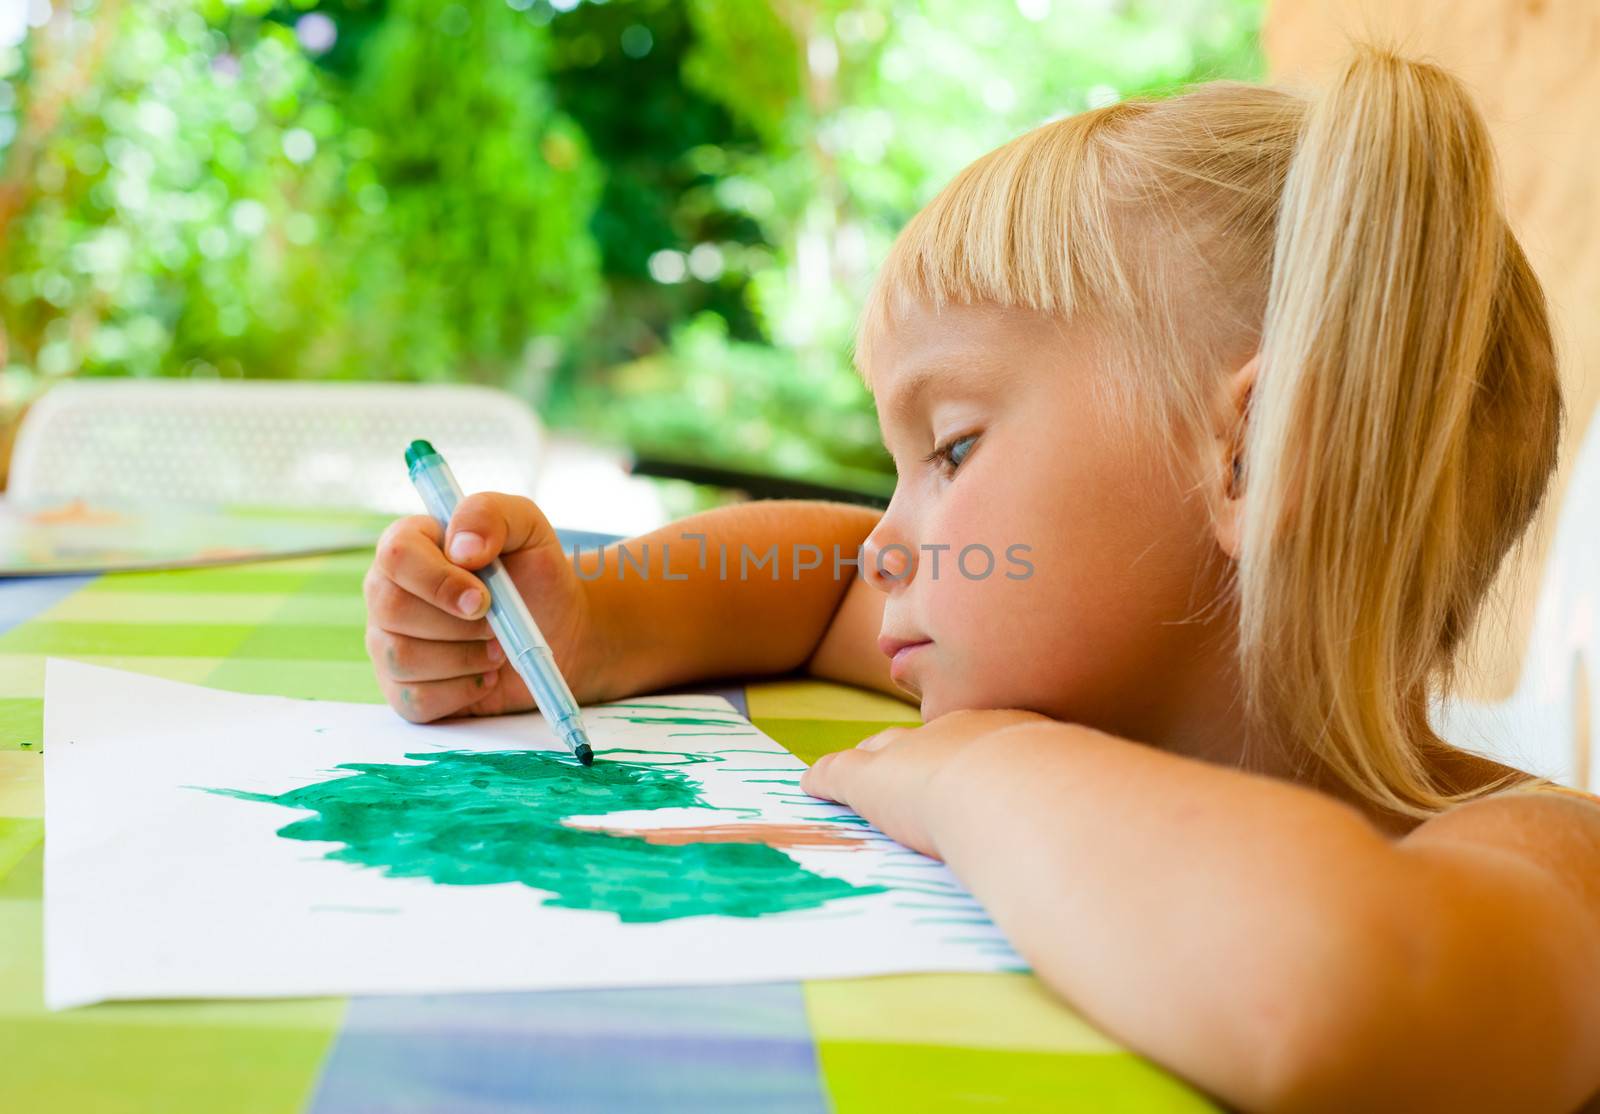 Cute 4 year old girl sitting at table drawing a tree